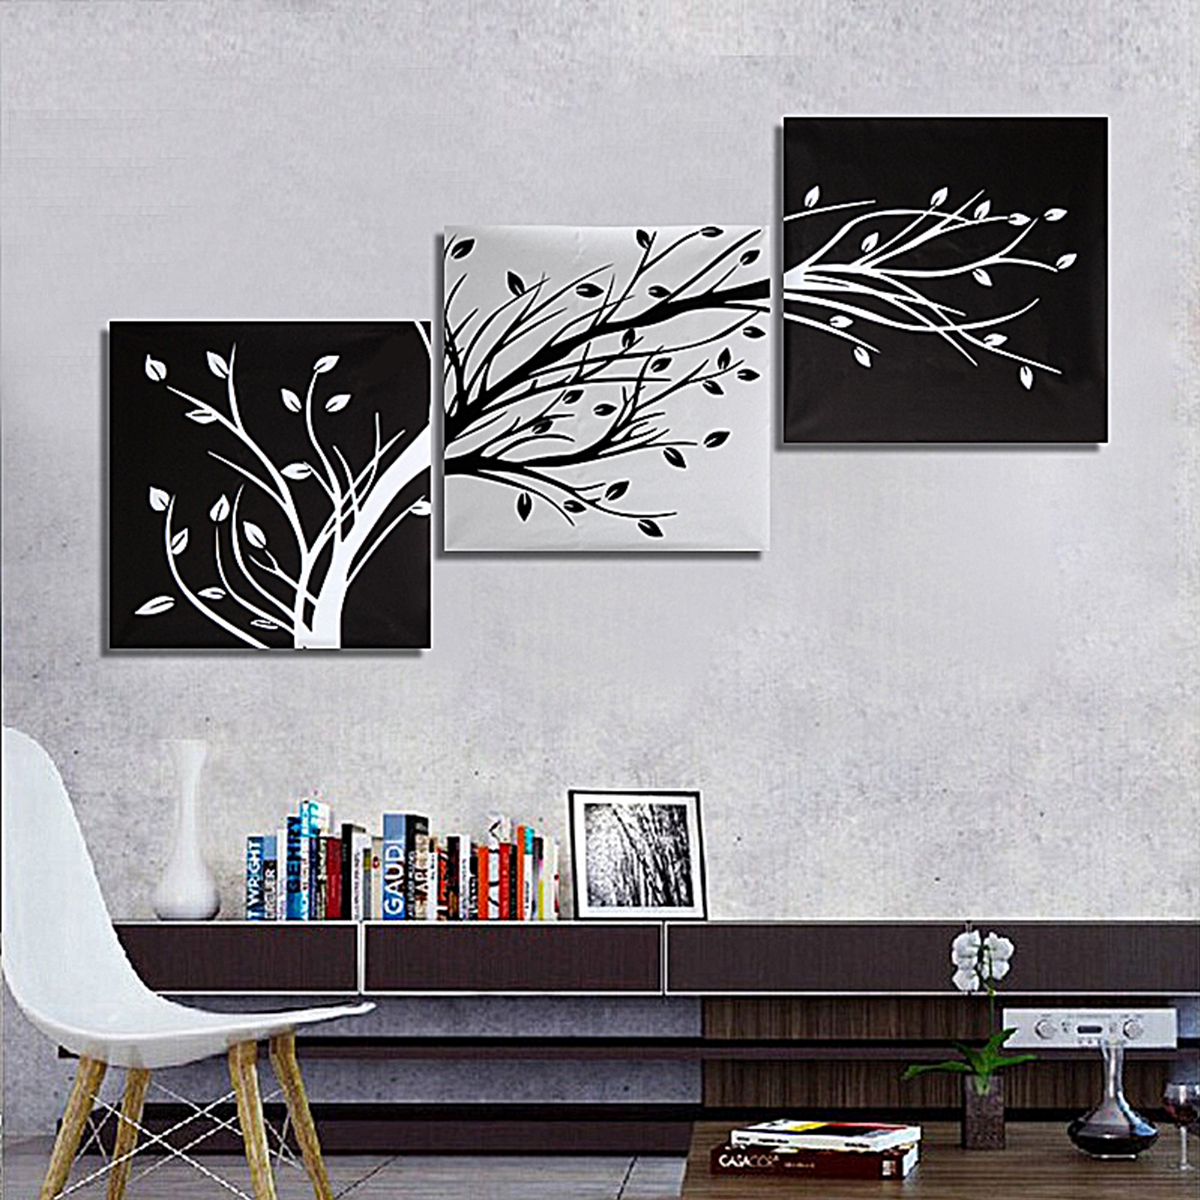 3Pcs-Wall-Decorative-Paintings-Abstract-Wood-Canvas-Print-Art-Pictures-Frameless-Wall-Hanging-Decor--1206624-4